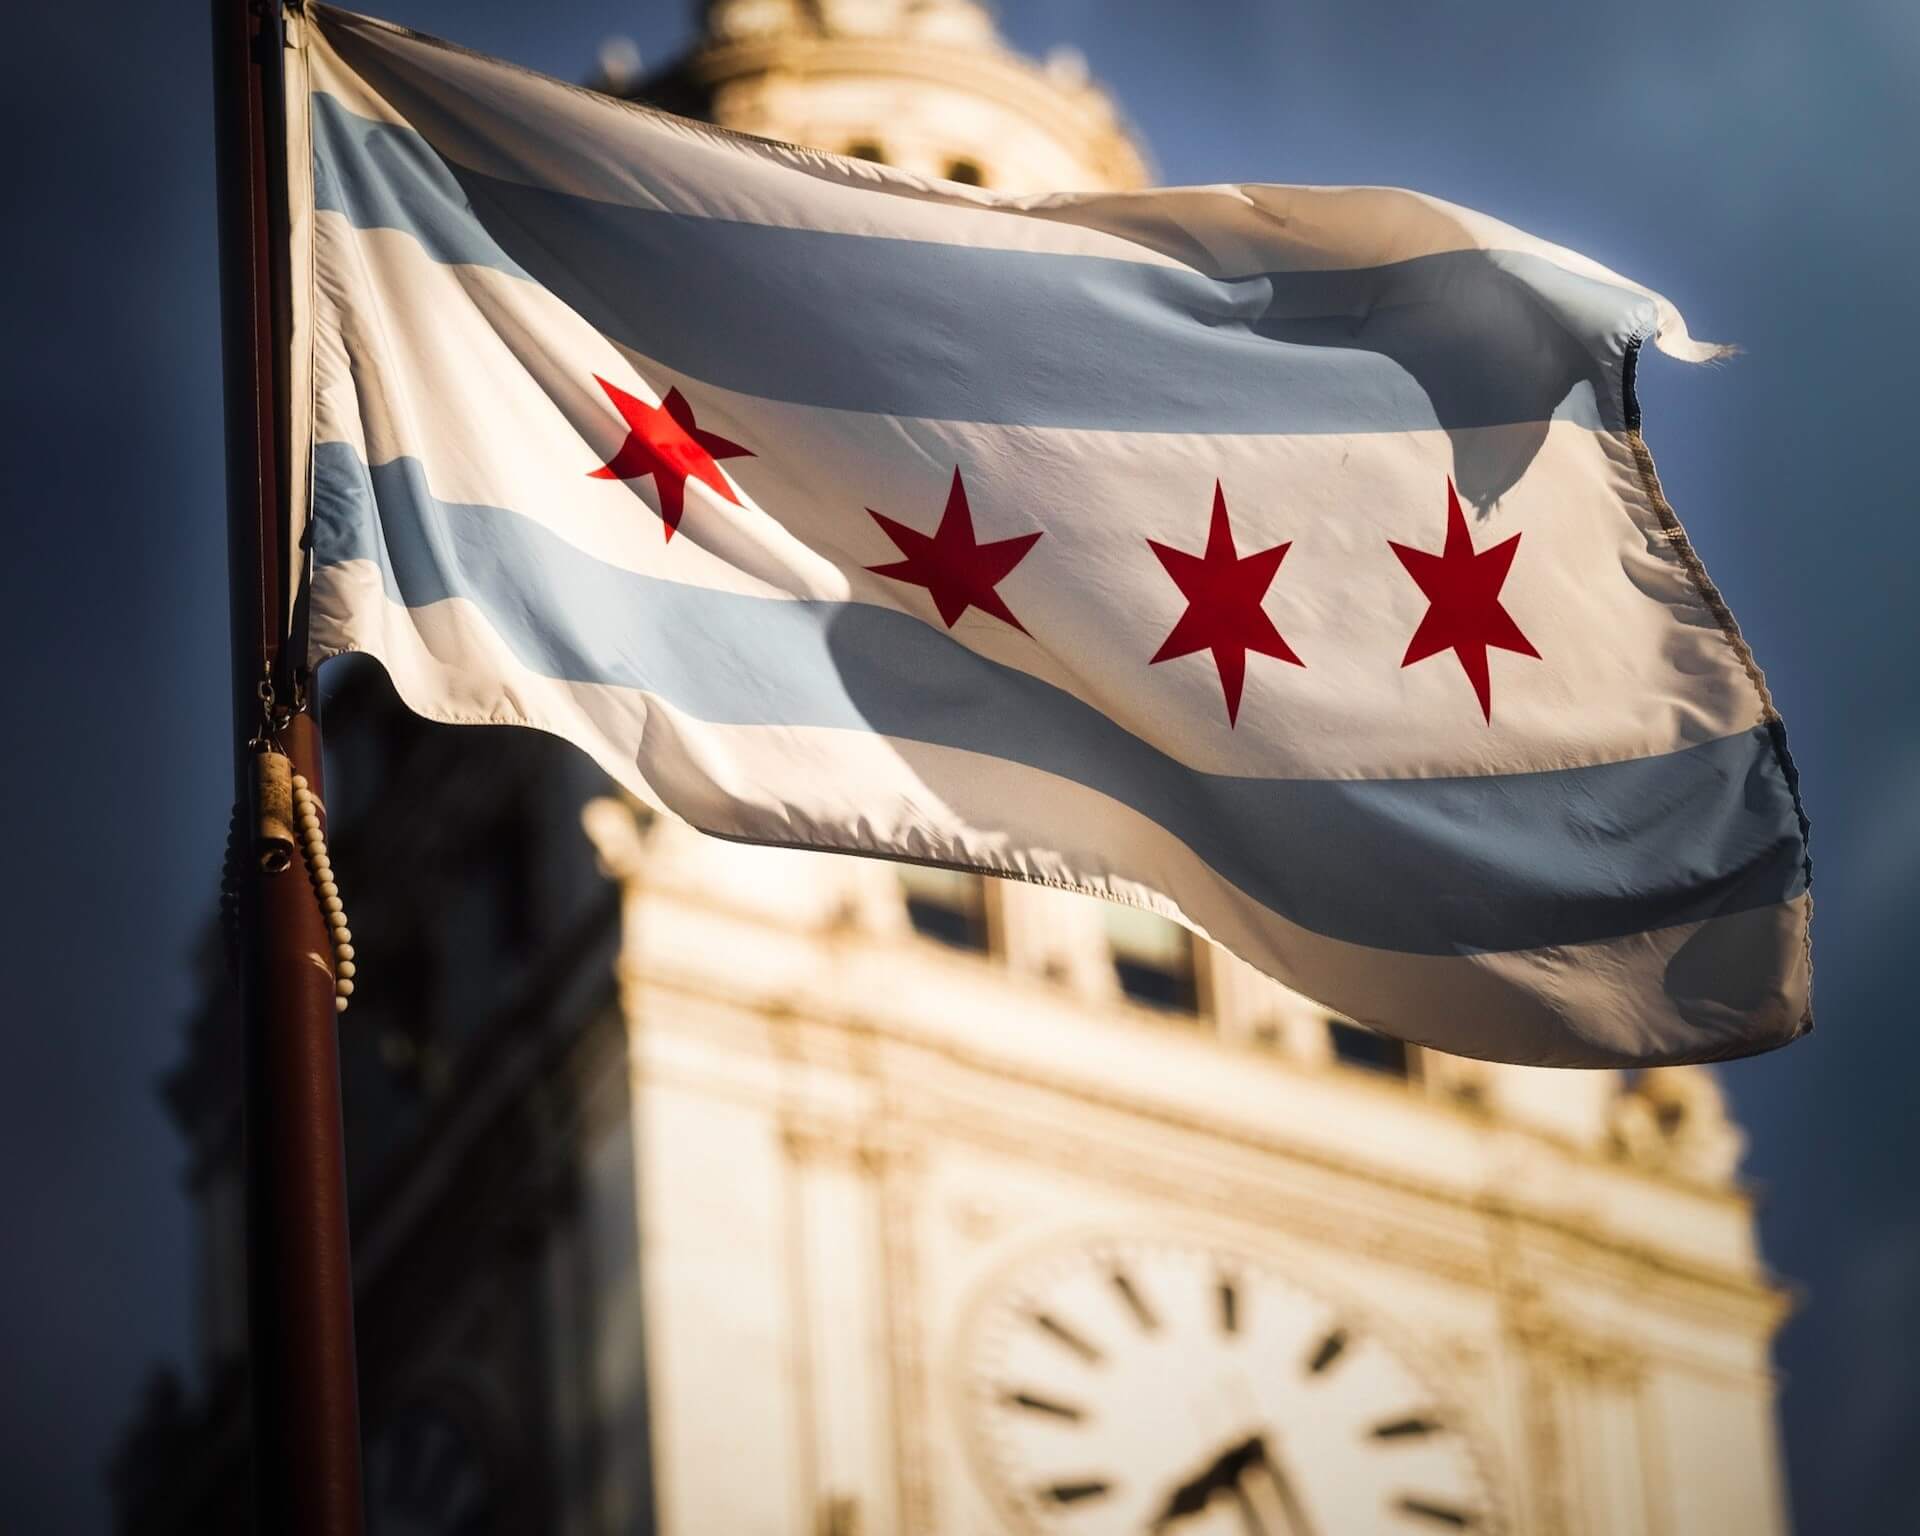 Closeup shot of the flag of the City of Chicago with Wrigley Building in background